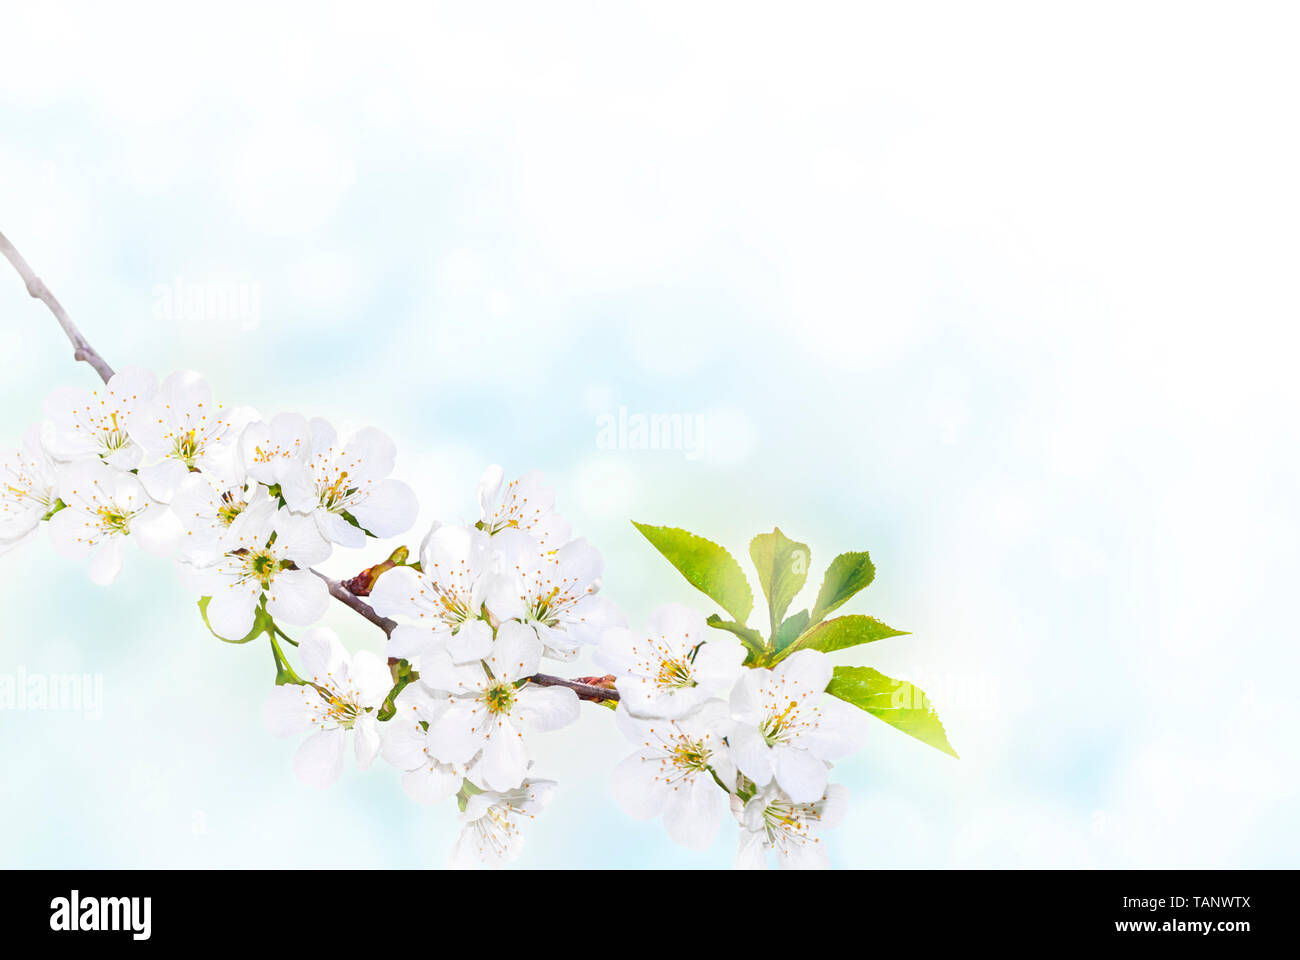 Branch of white spring blossom over blue sunny bokeh background close-up. Stock Photo